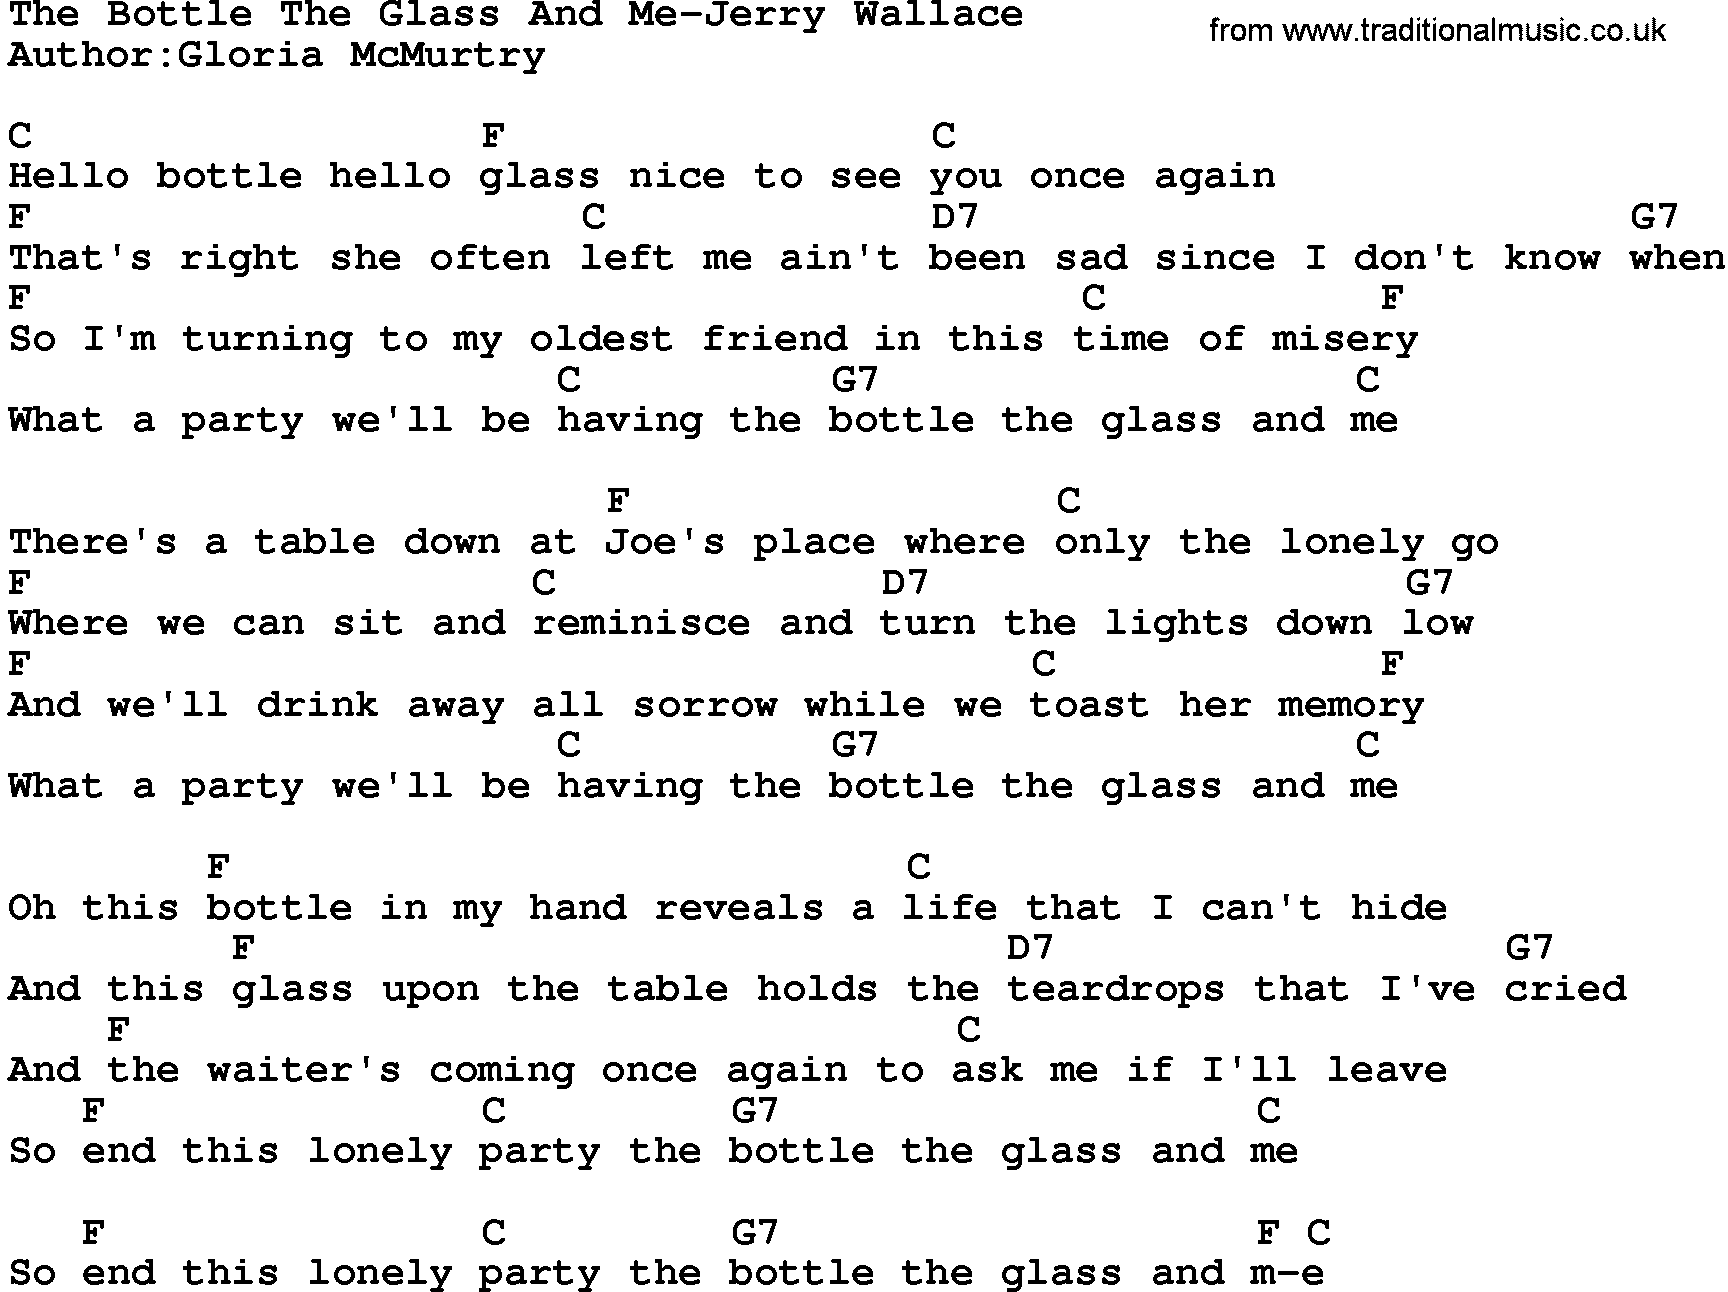 Country music song: The Bottle The Glass And Me-Jerry Wallace lyrics and chords